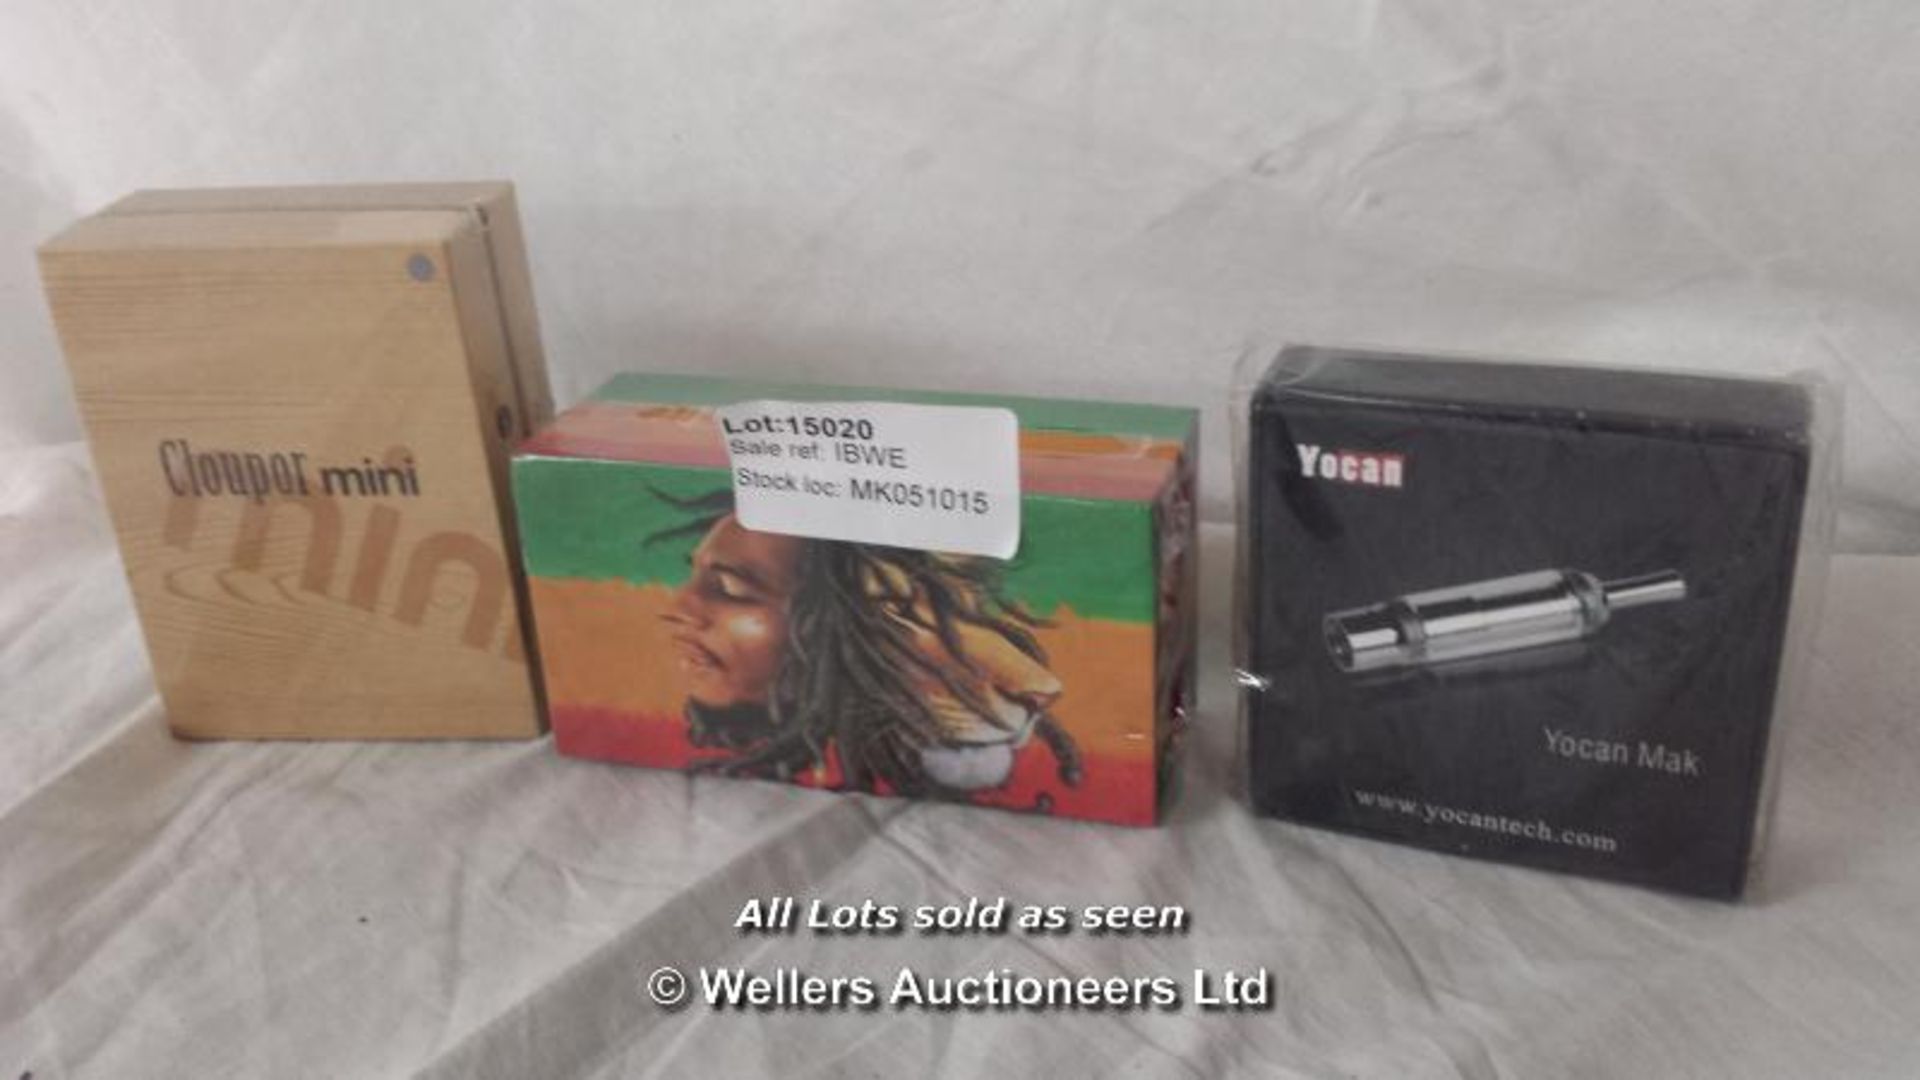 3X E-CIGARETTE SETS INCLUDING BOB MARLEY, CLOUPOR MINI AND YOCAN MAK (THIS LOT IS FOR DELIVERY ONLY)